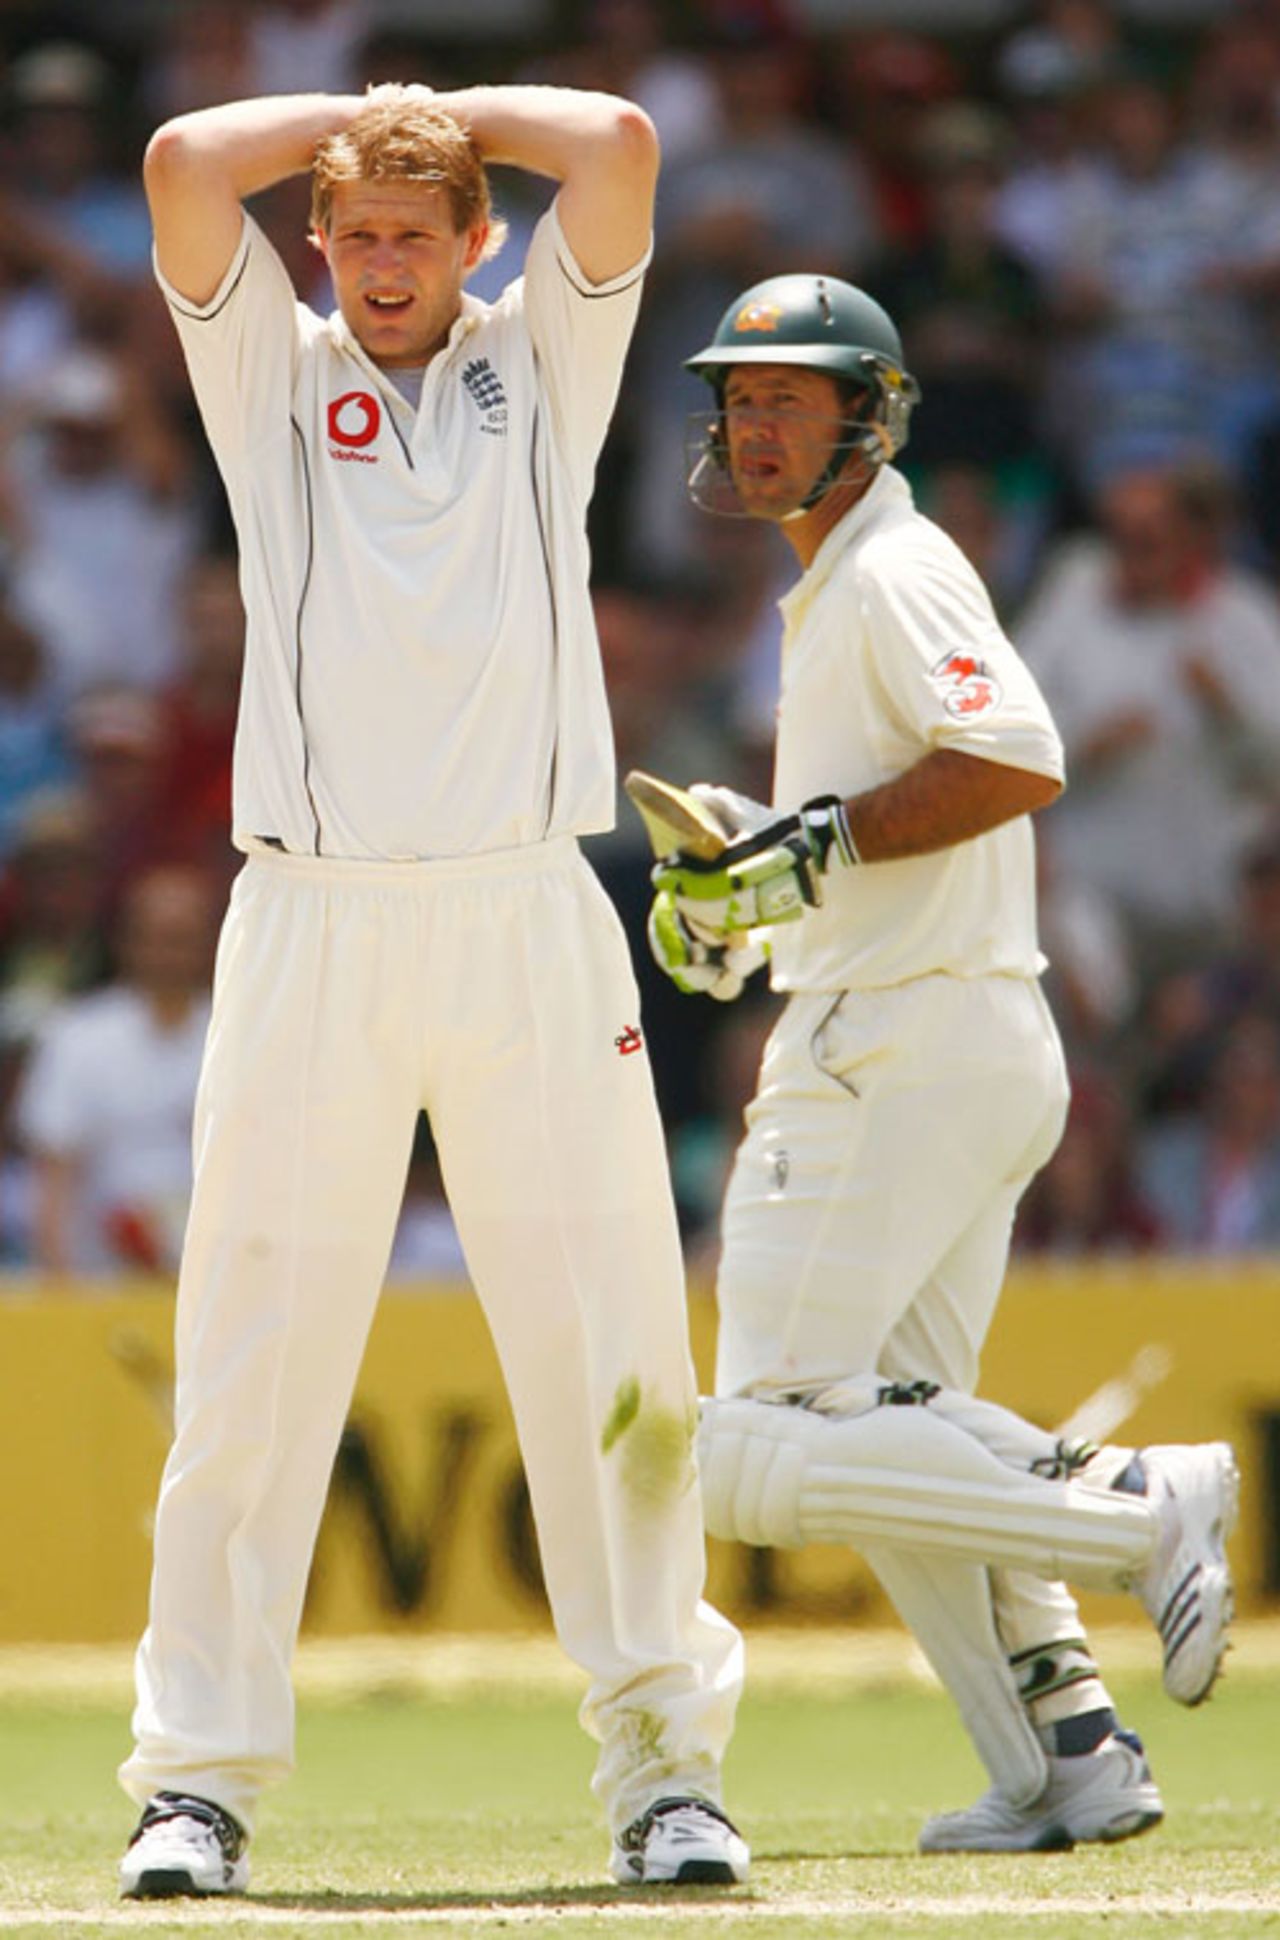 Matthew Hoggard can only look as Ricky Ponting is dropped in the deep by Ashley Giles, Australia v England, 2nd Test, Adelaide, December 3, 2006